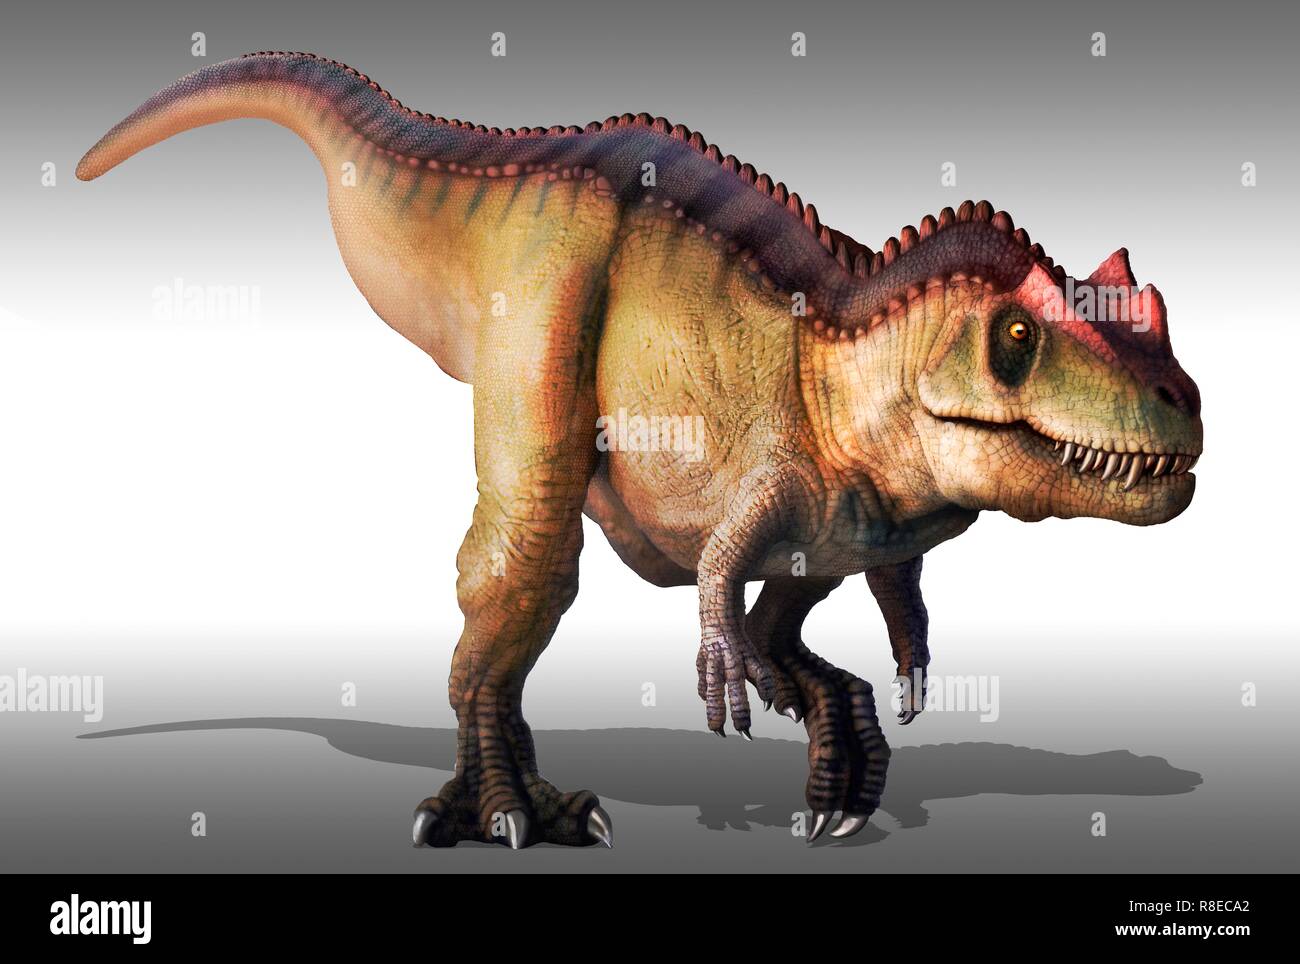 Ceratosaurus, illustration. This large carnivorous theropod dinosaur lived during the Late Jurassic (153-148 million years ago) in what is now North America. It reached lengths of 6 to 7 metres. Stock Photo